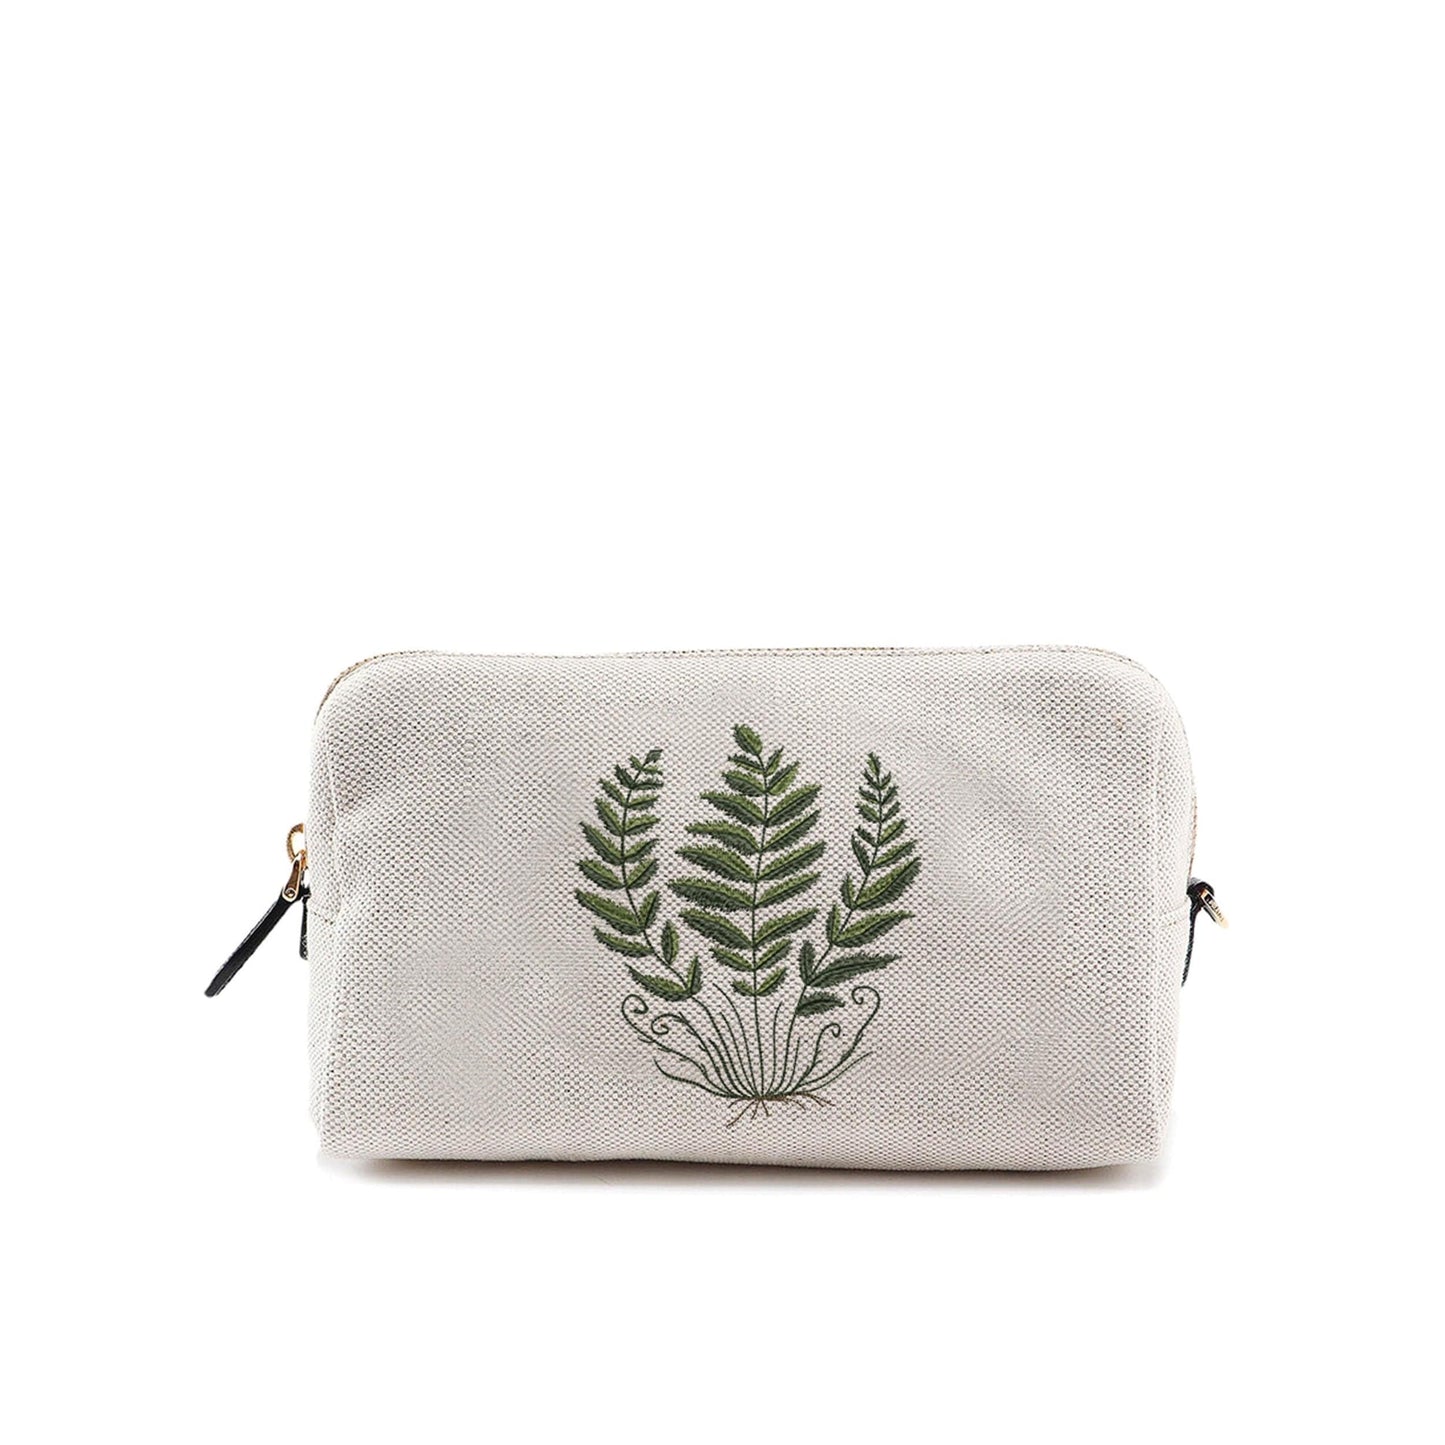 Forest Fern Machine Embroidery Design on pouch